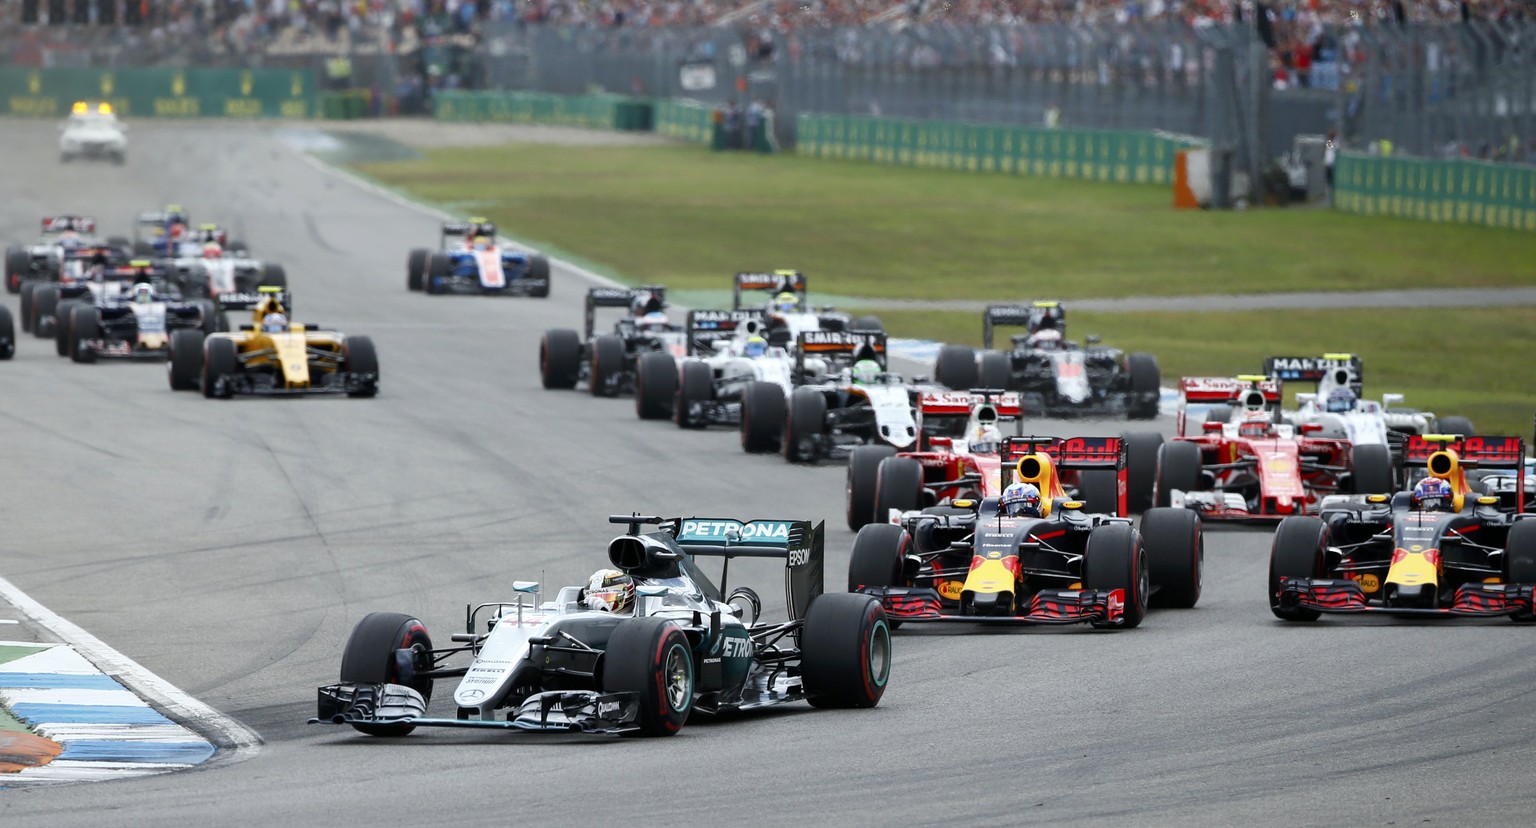 Germany Formula One - F1 - German Grand Prix 2016 - Hockenheimring, Germany - 31/7/16 - Mercedes' Lewis Hamilton leads after the start of the race. REUTERS/Ralph Orlowski